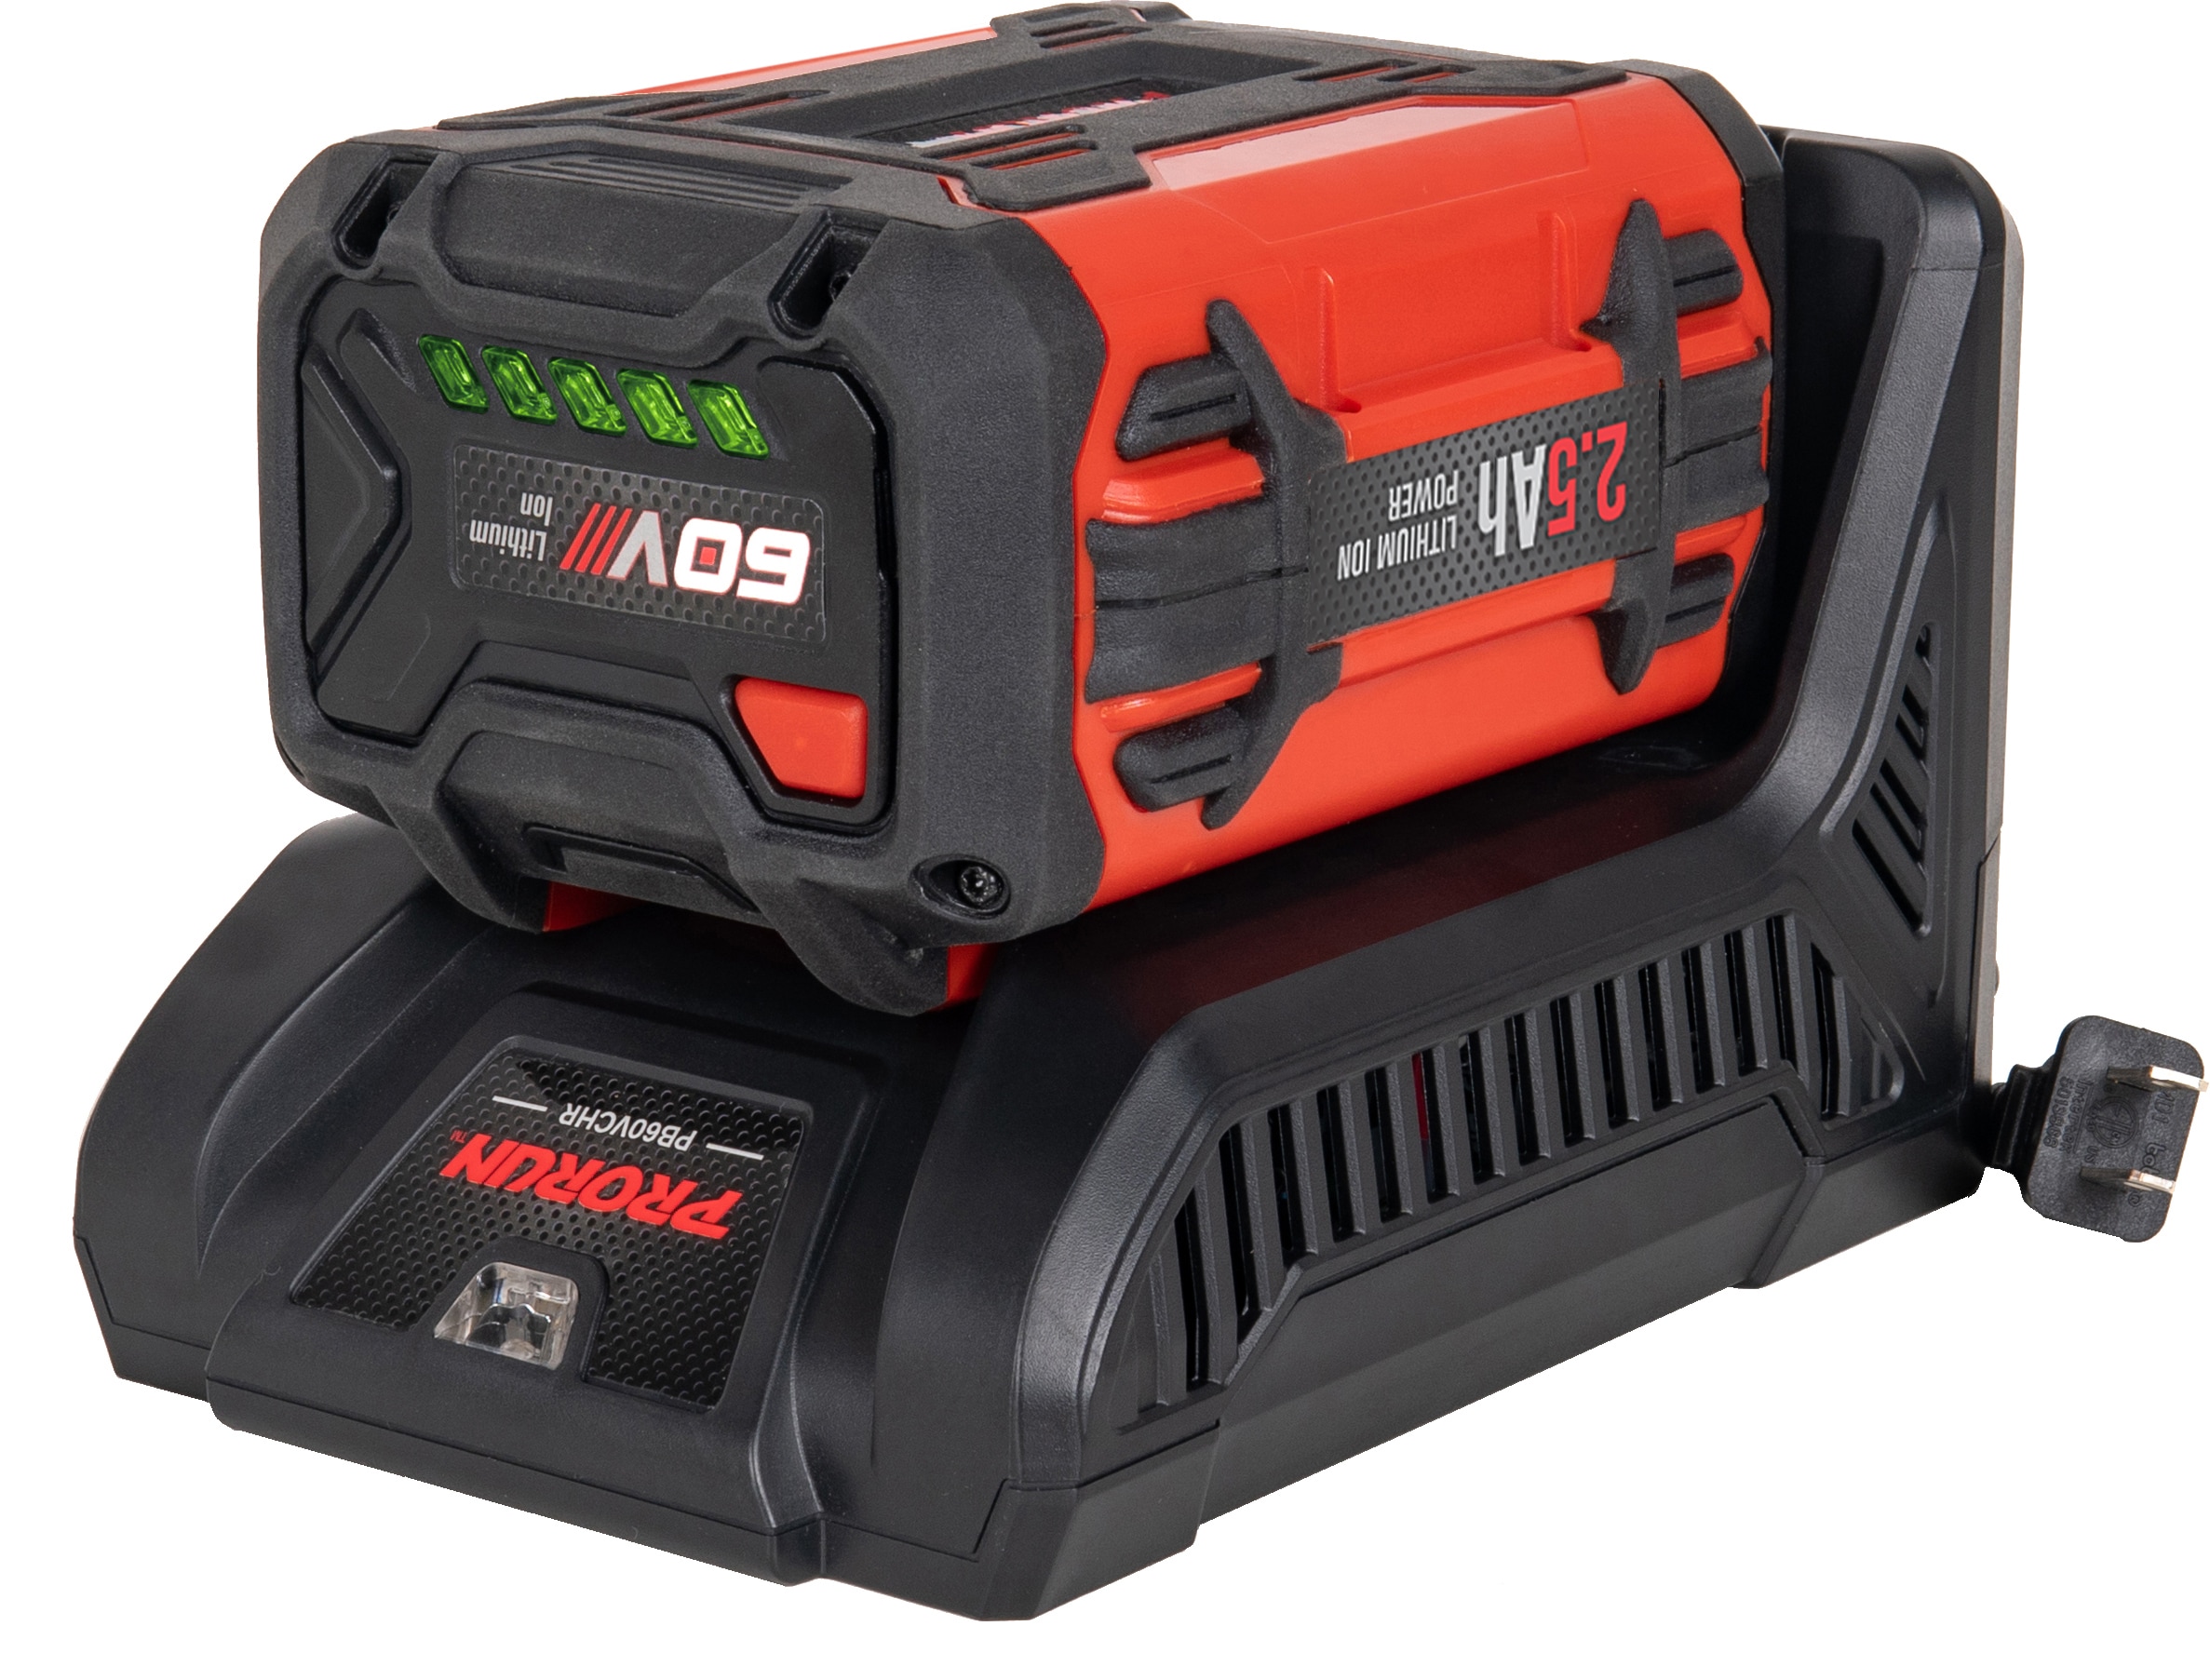 60 Volt Cordless Power Equipment Batteries & Chargers at